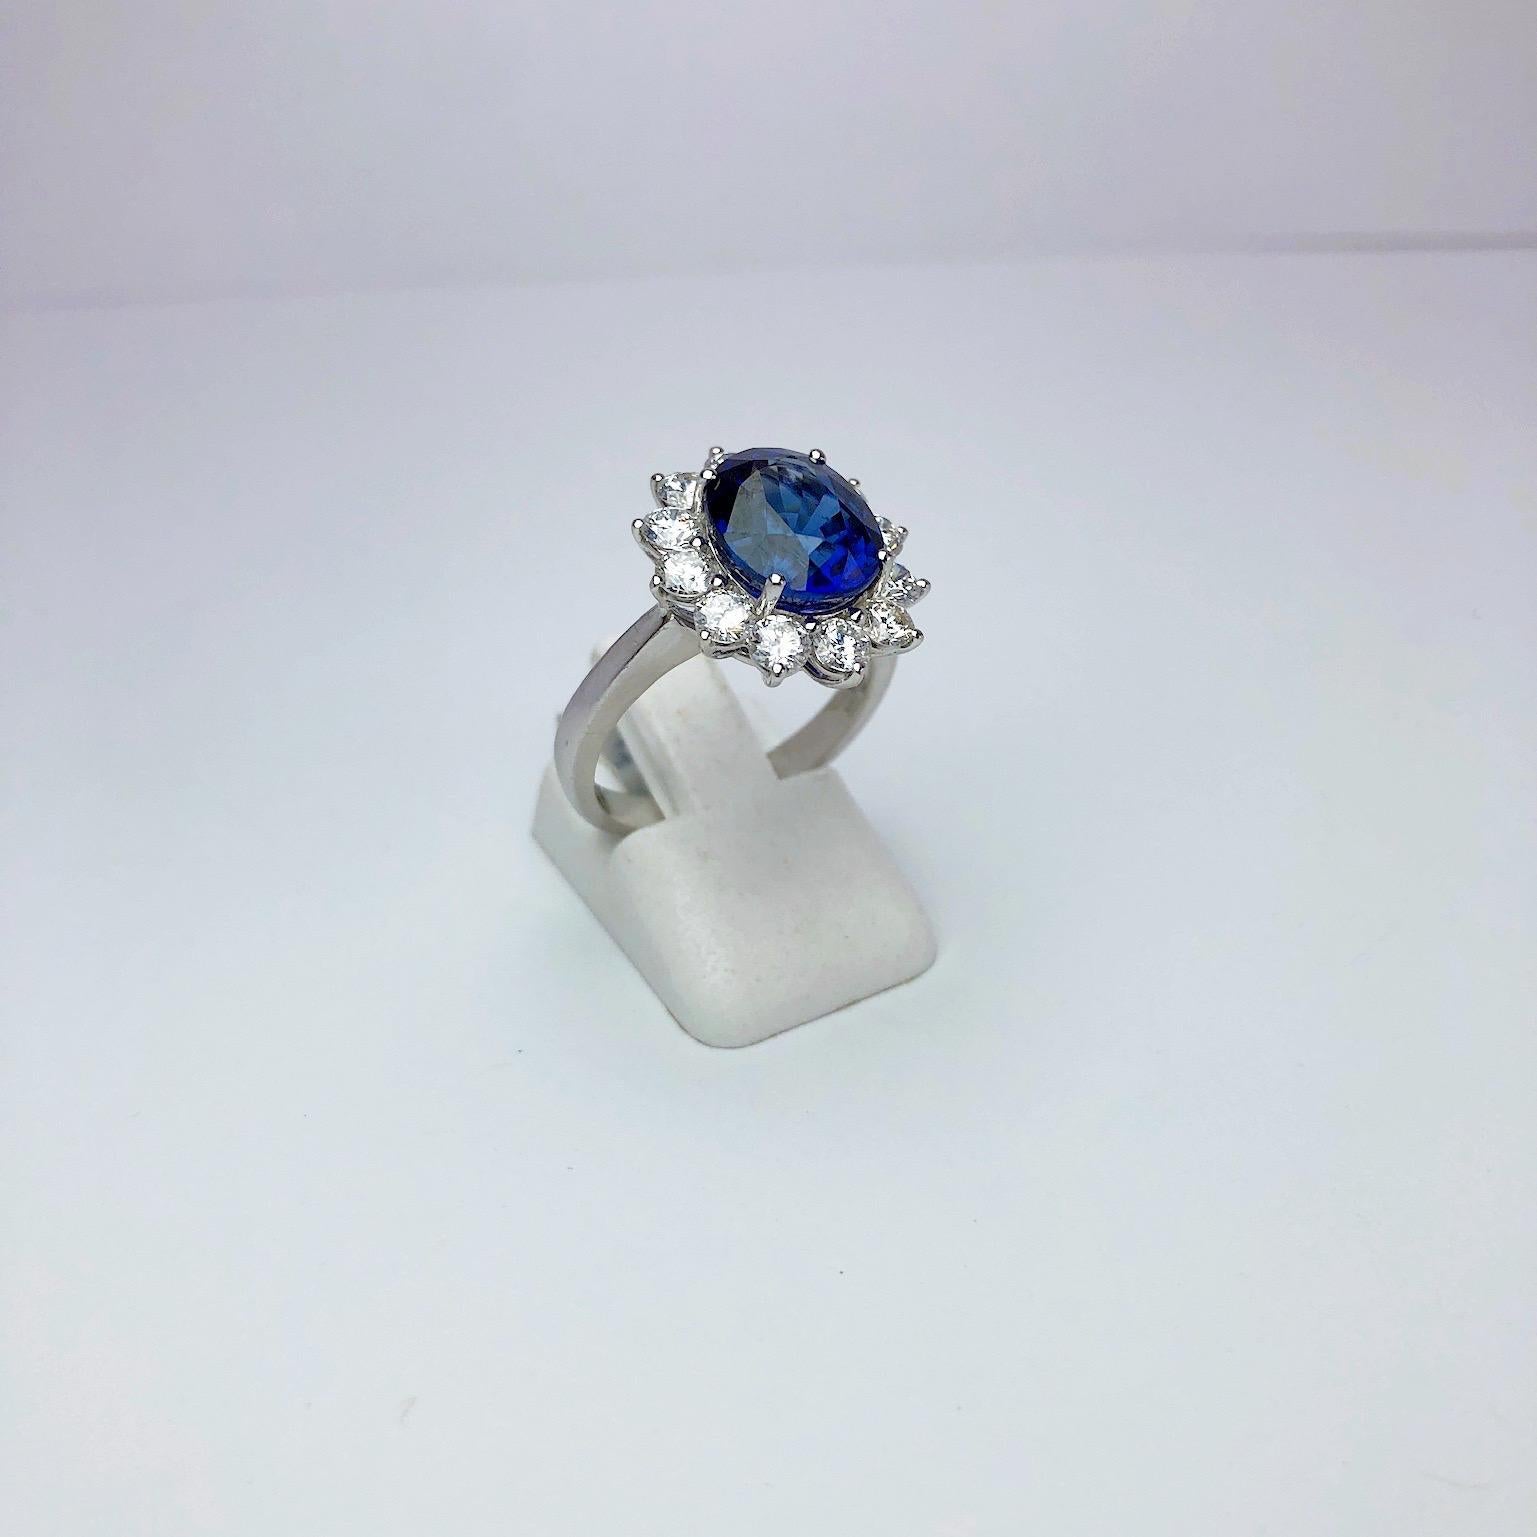 5.11 Carat Emerald Cut Blue Sapphire and Diamond Engagement Ring in  Platinum For Sale at 1stDibs | costco sapphire ring, sapphire engagement rings  costco, costco blue sapphire ring